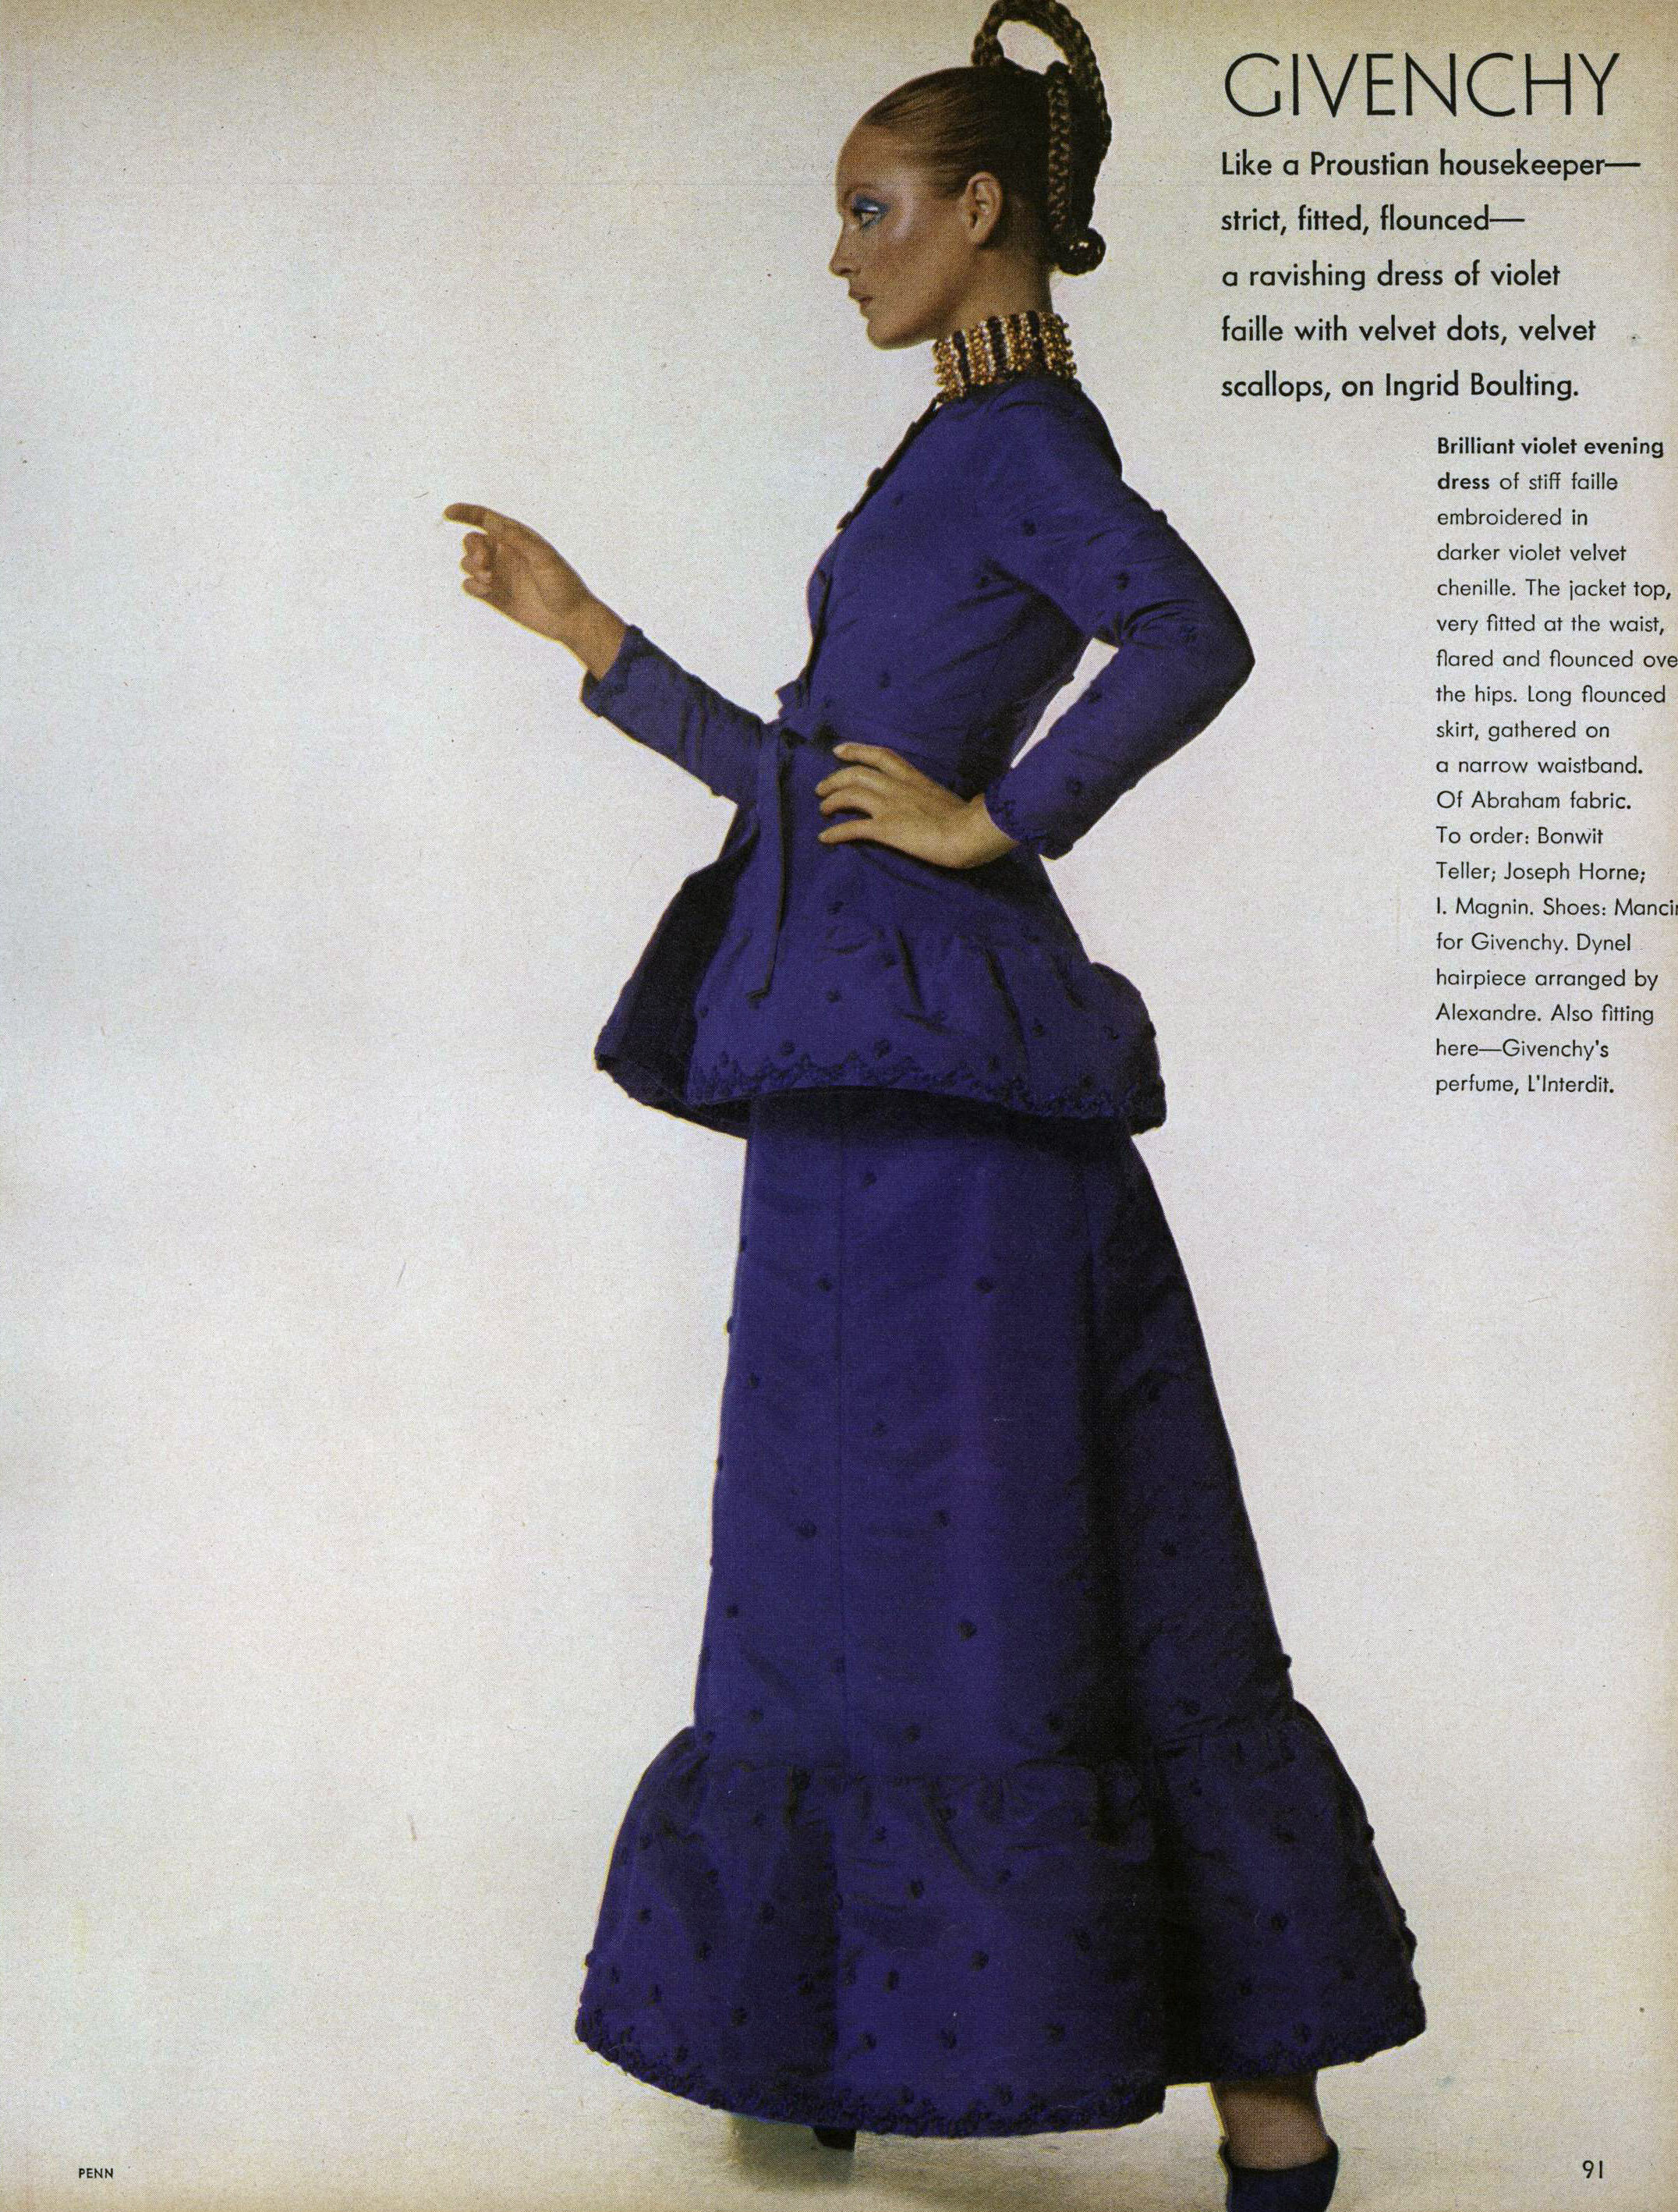 Wearing Givenchy couture for Irving Penn. Vogue, September 15, 1970.